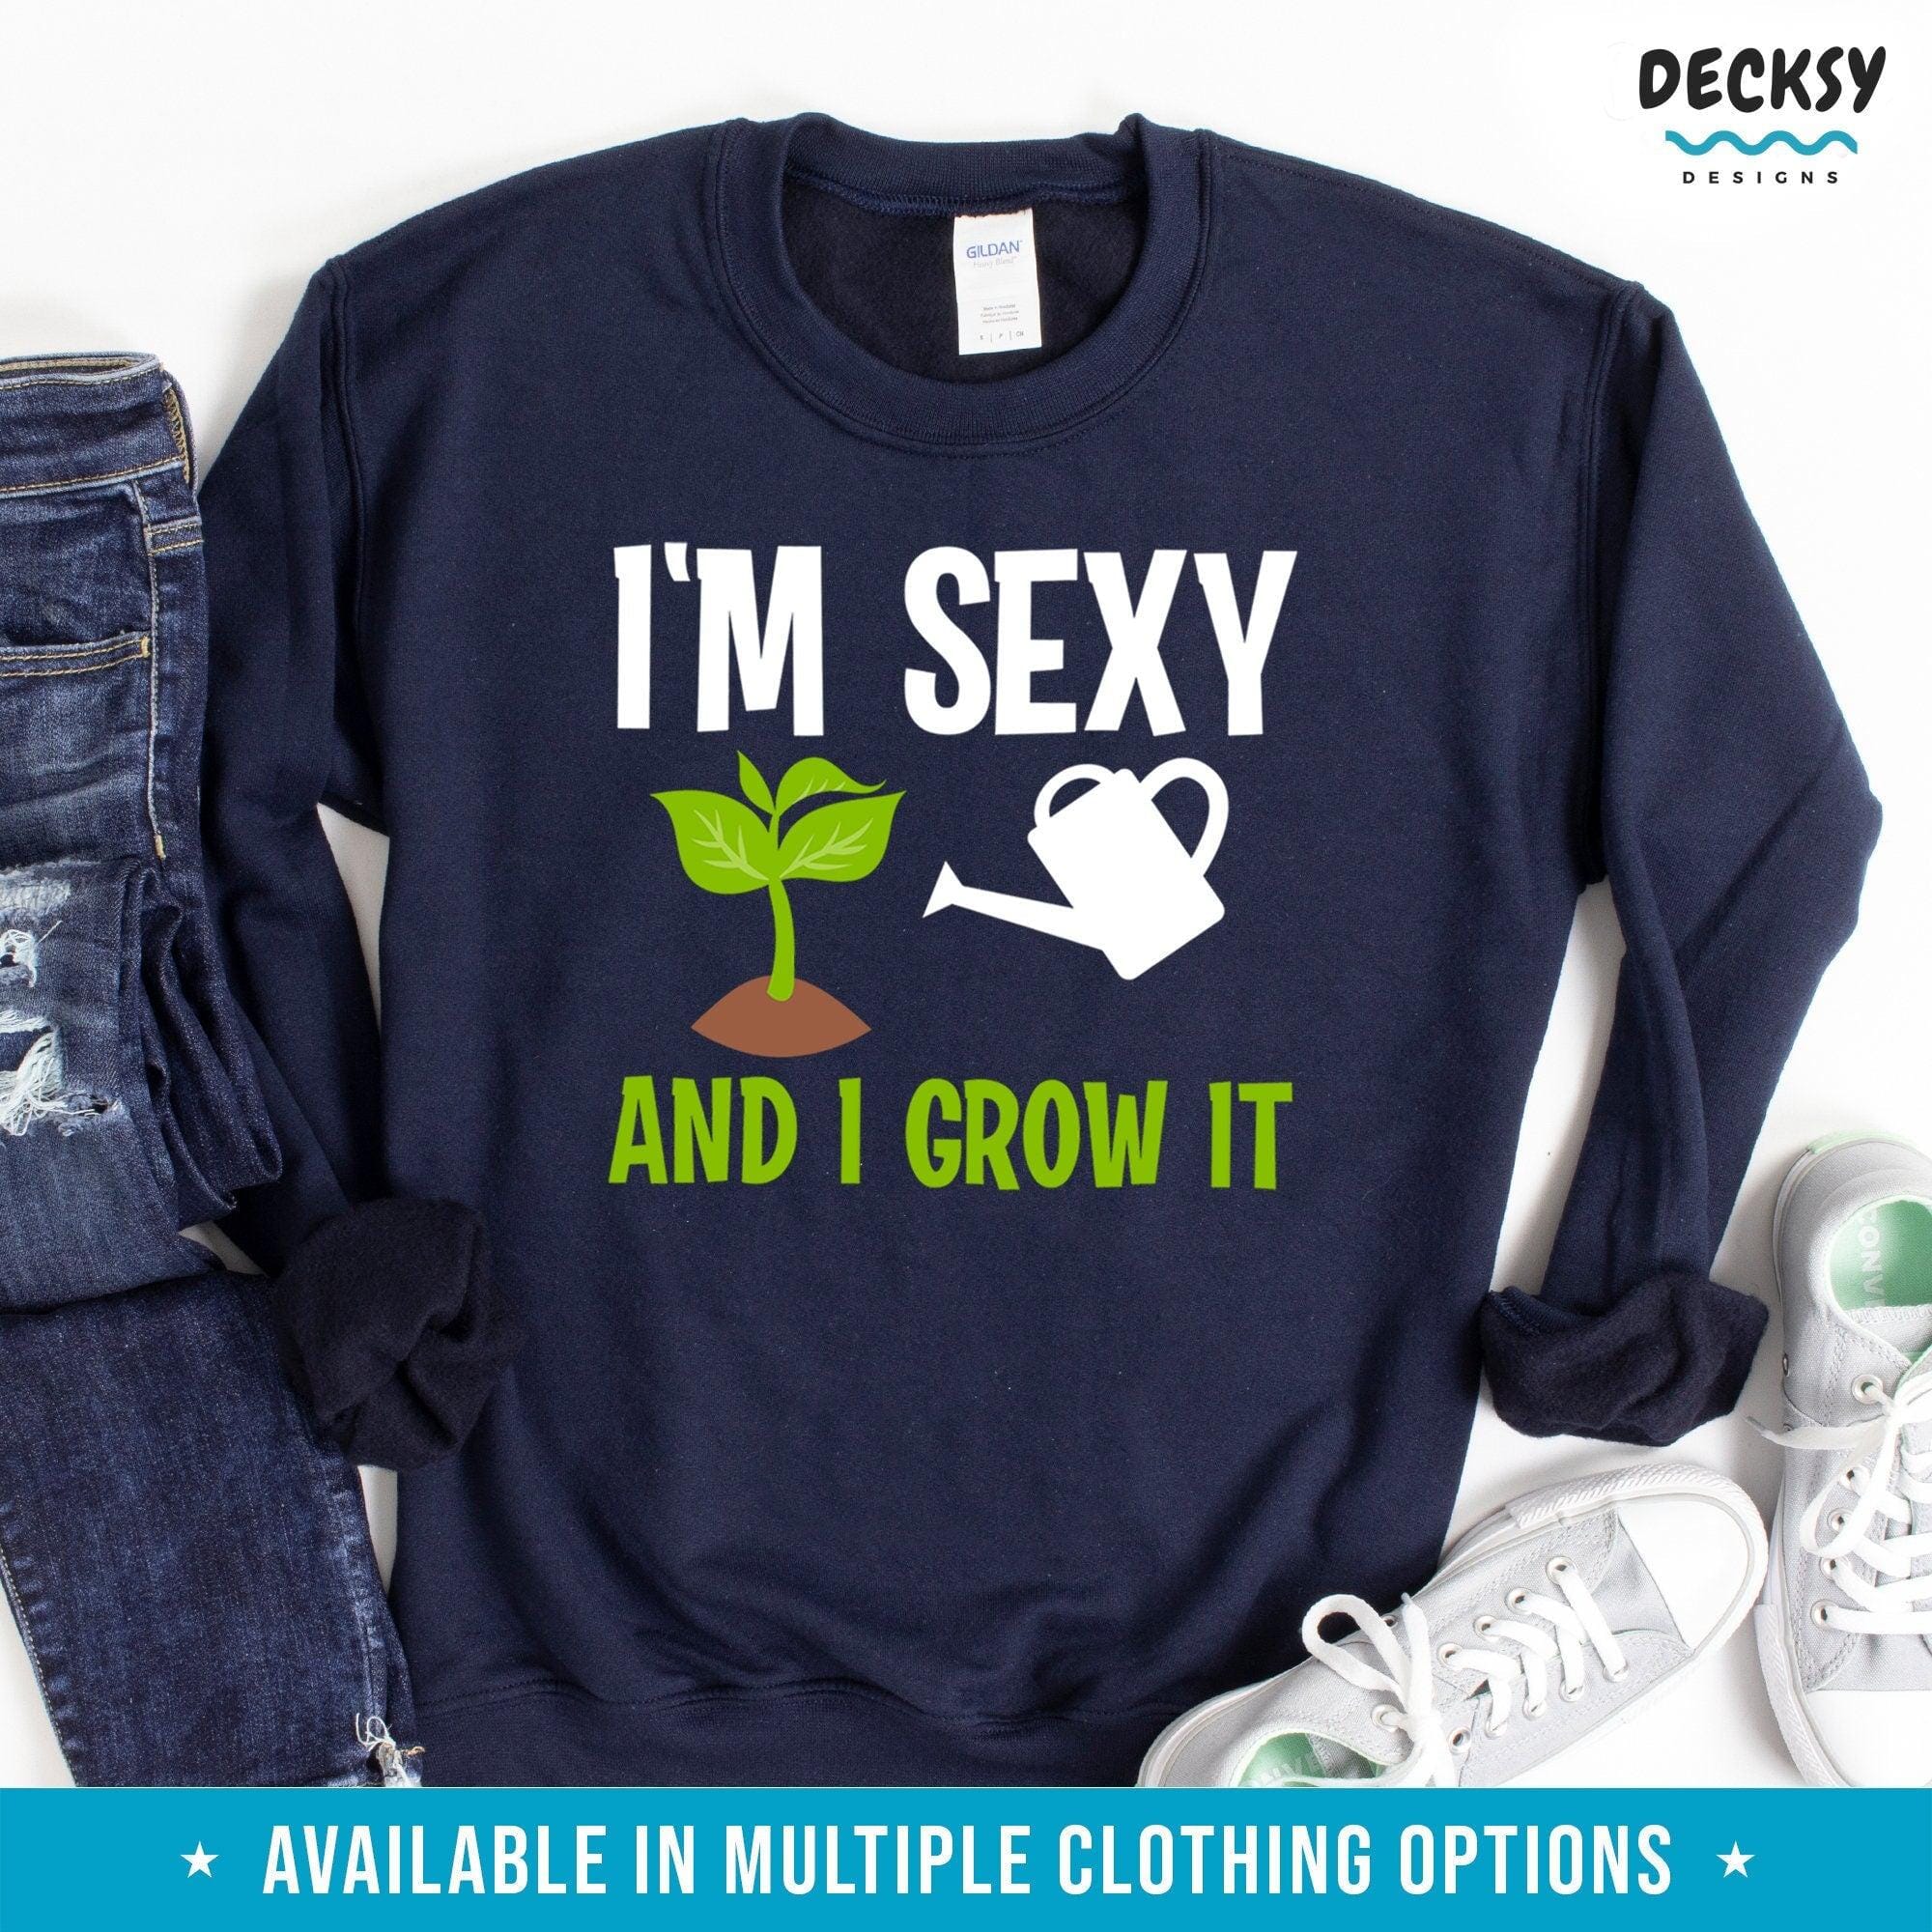 Gardening Shirt, Plant Lover Gift-Clothing:Gender-Neutral Adult Clothing:Tops & Tees:T-shirts:Graphic Tees-DecksyDesigns